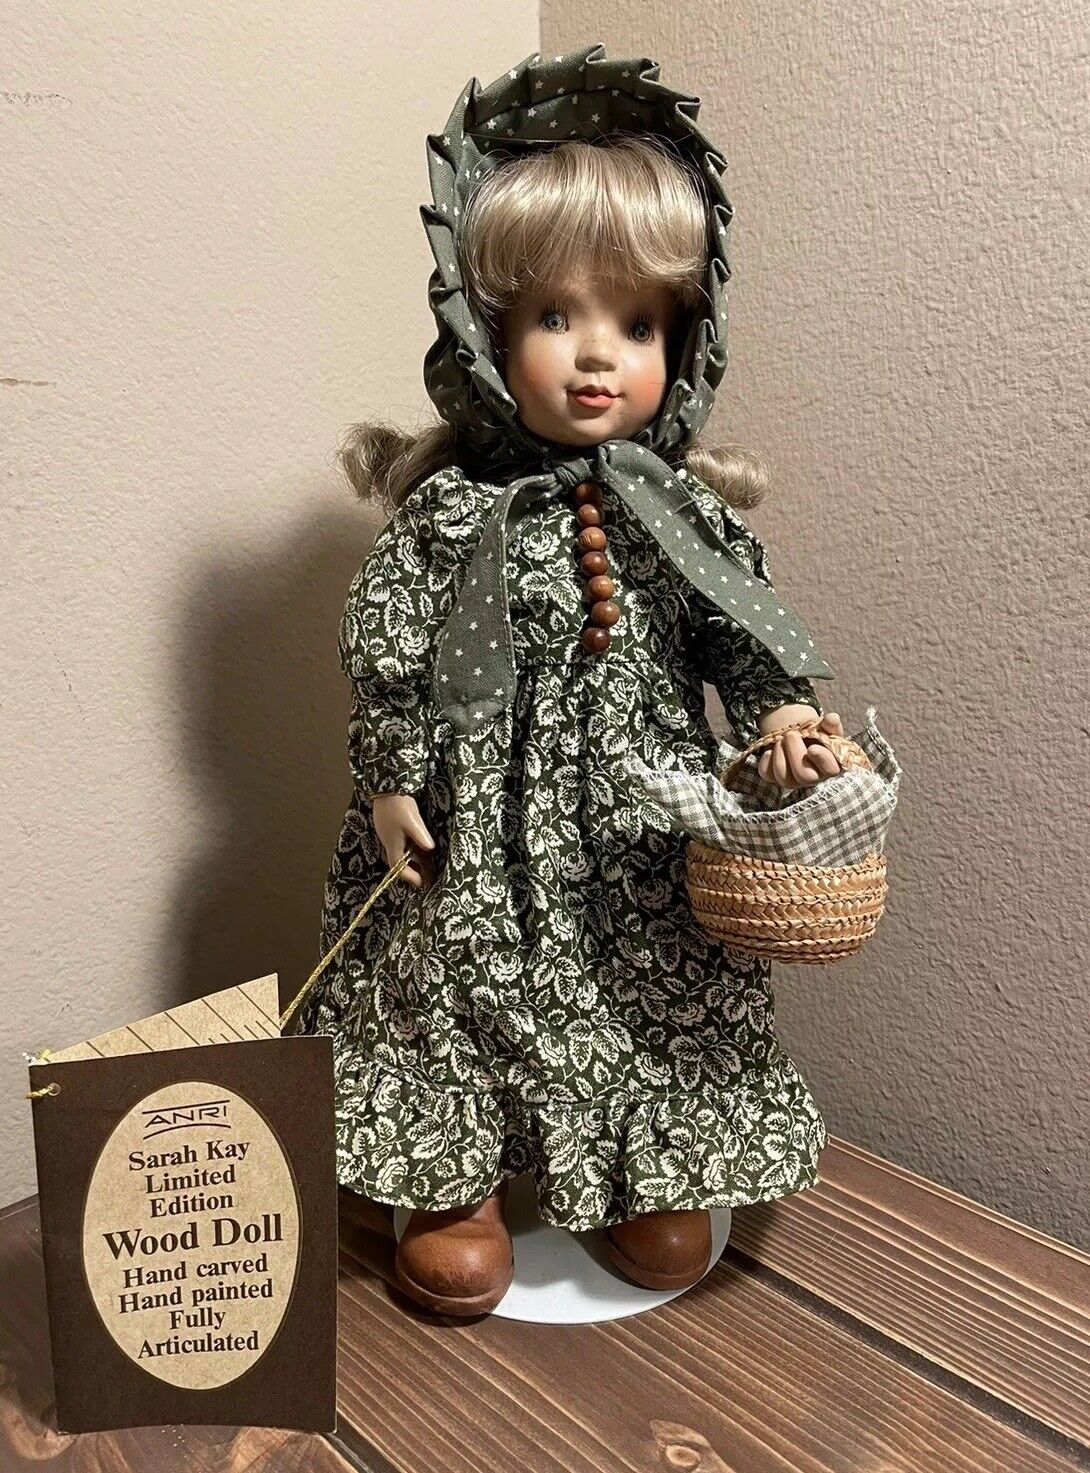 Anri by Sarah Kay Limited Edition 14” Wood Doll “Emily”